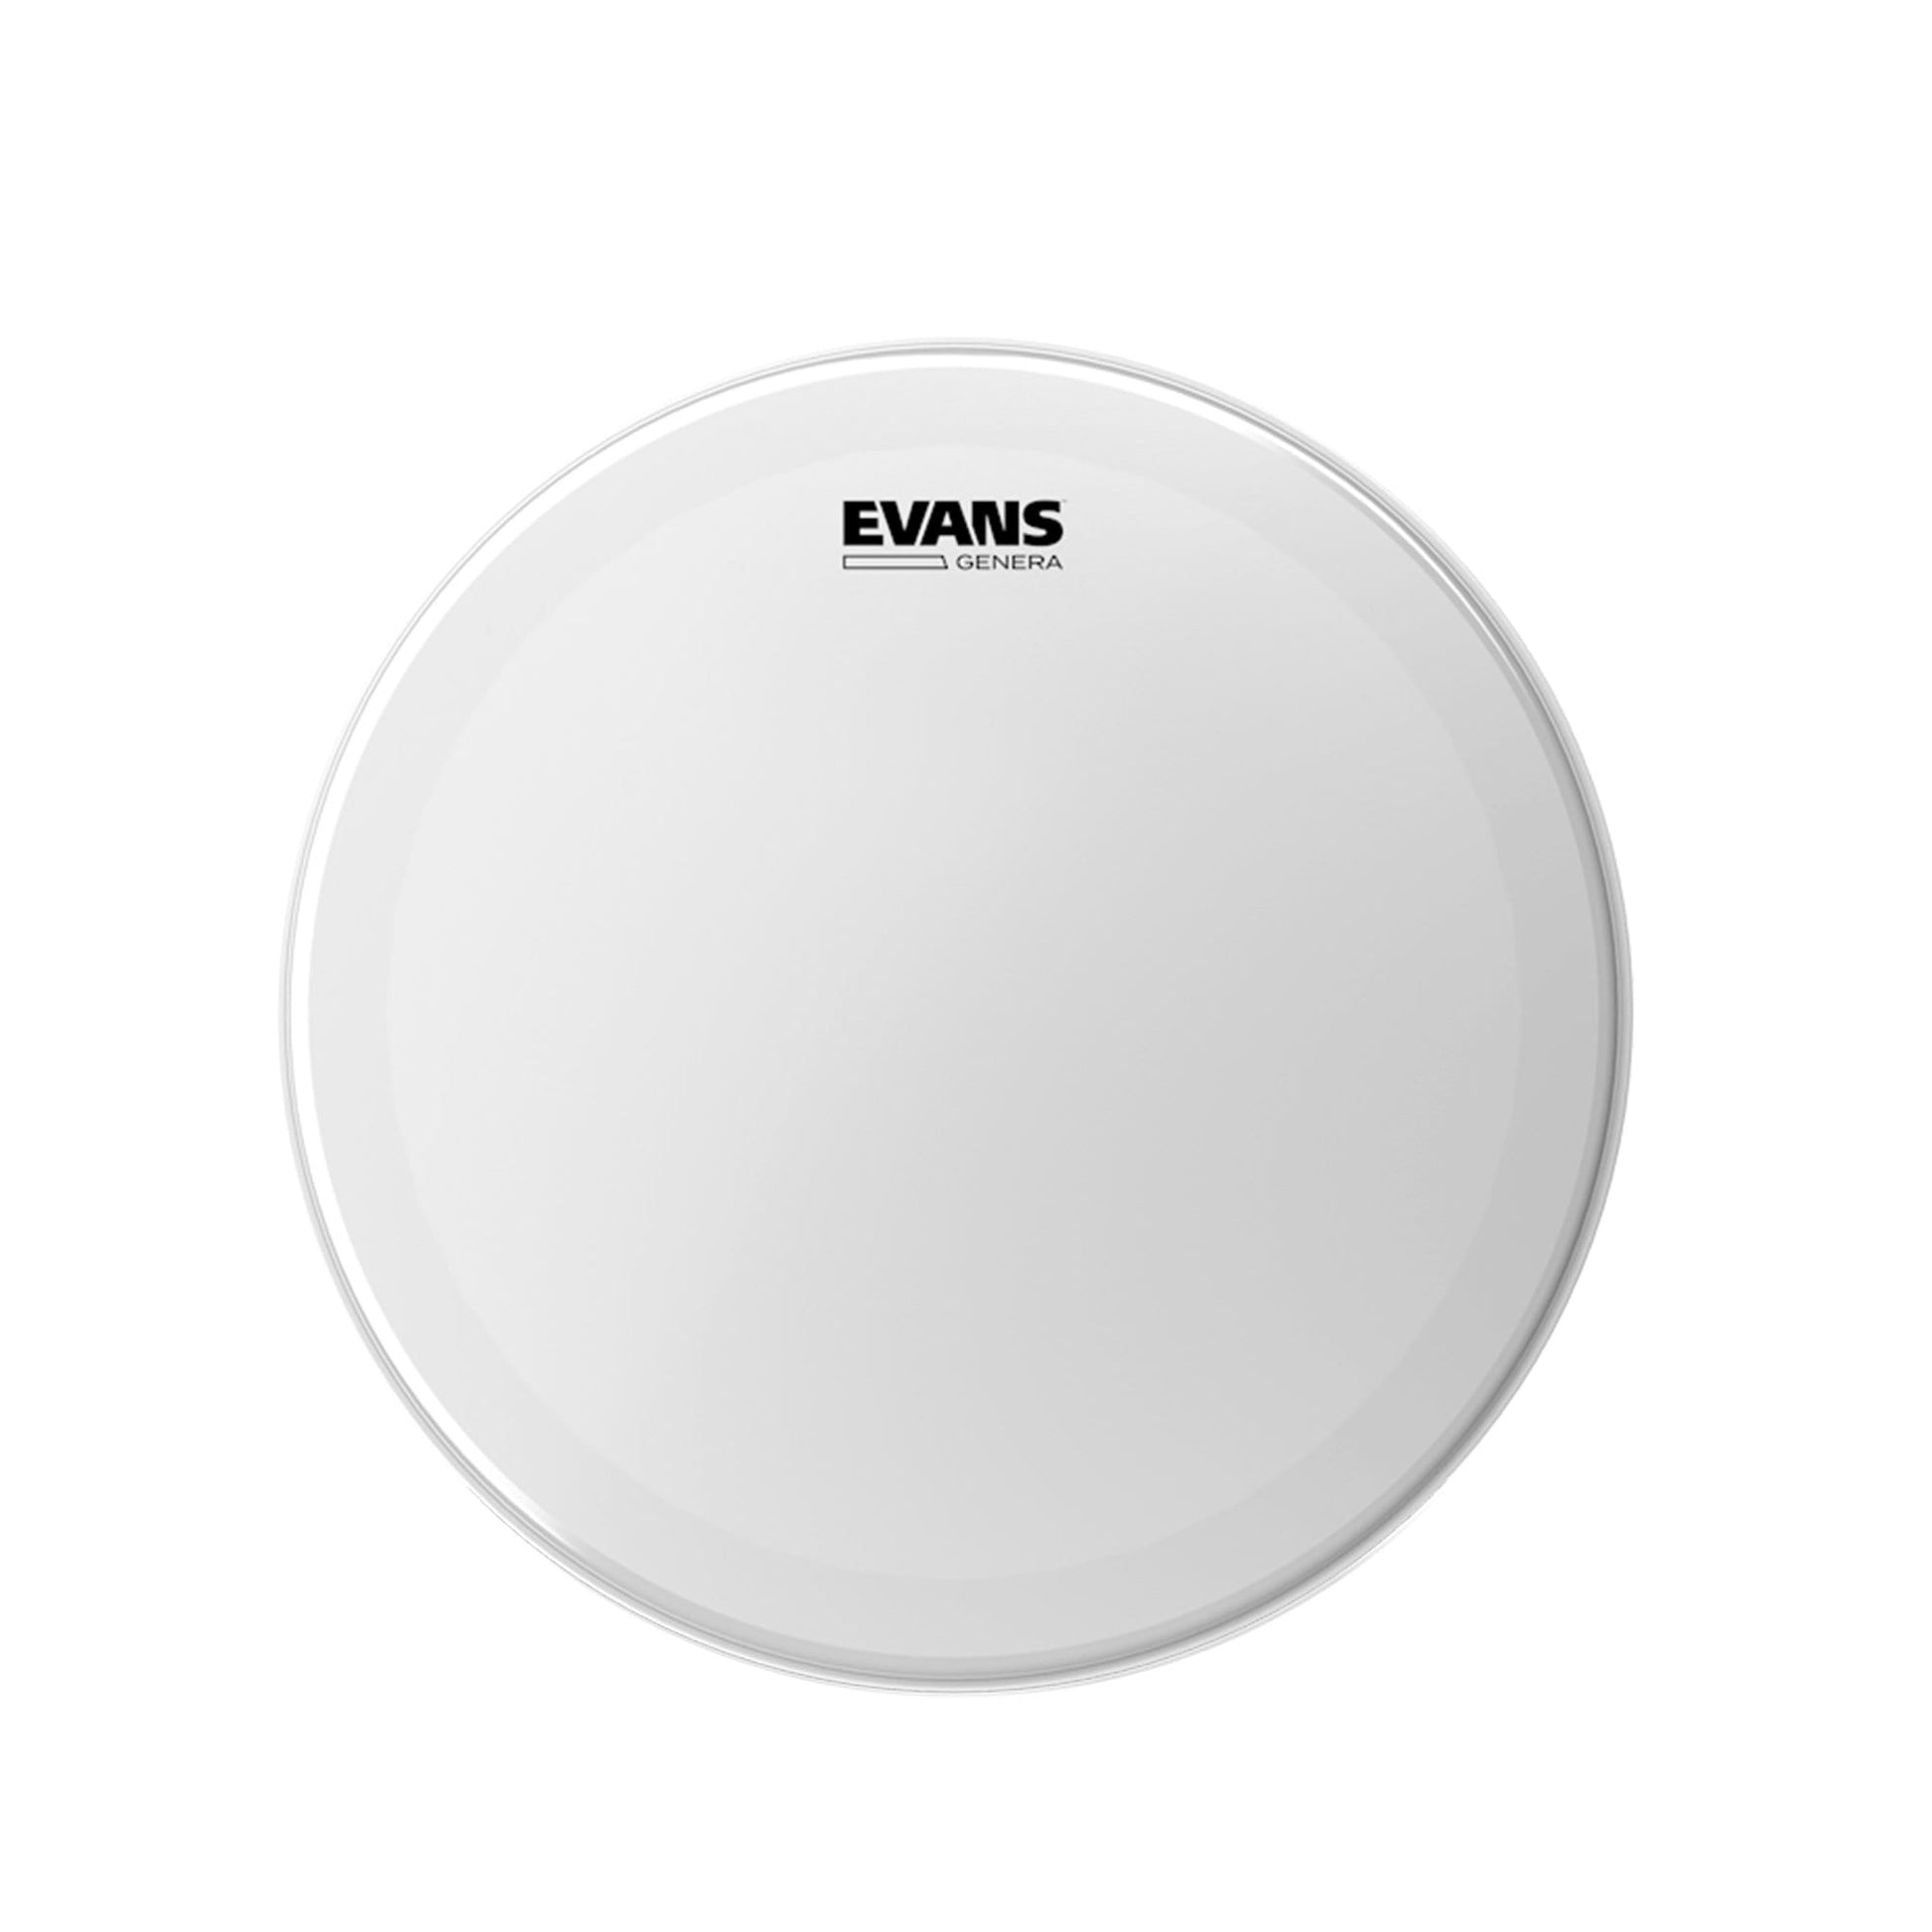 Evans 13" Genera Snare Batter Drumhead Drums and Percussion / Parts and Accessories / Heads